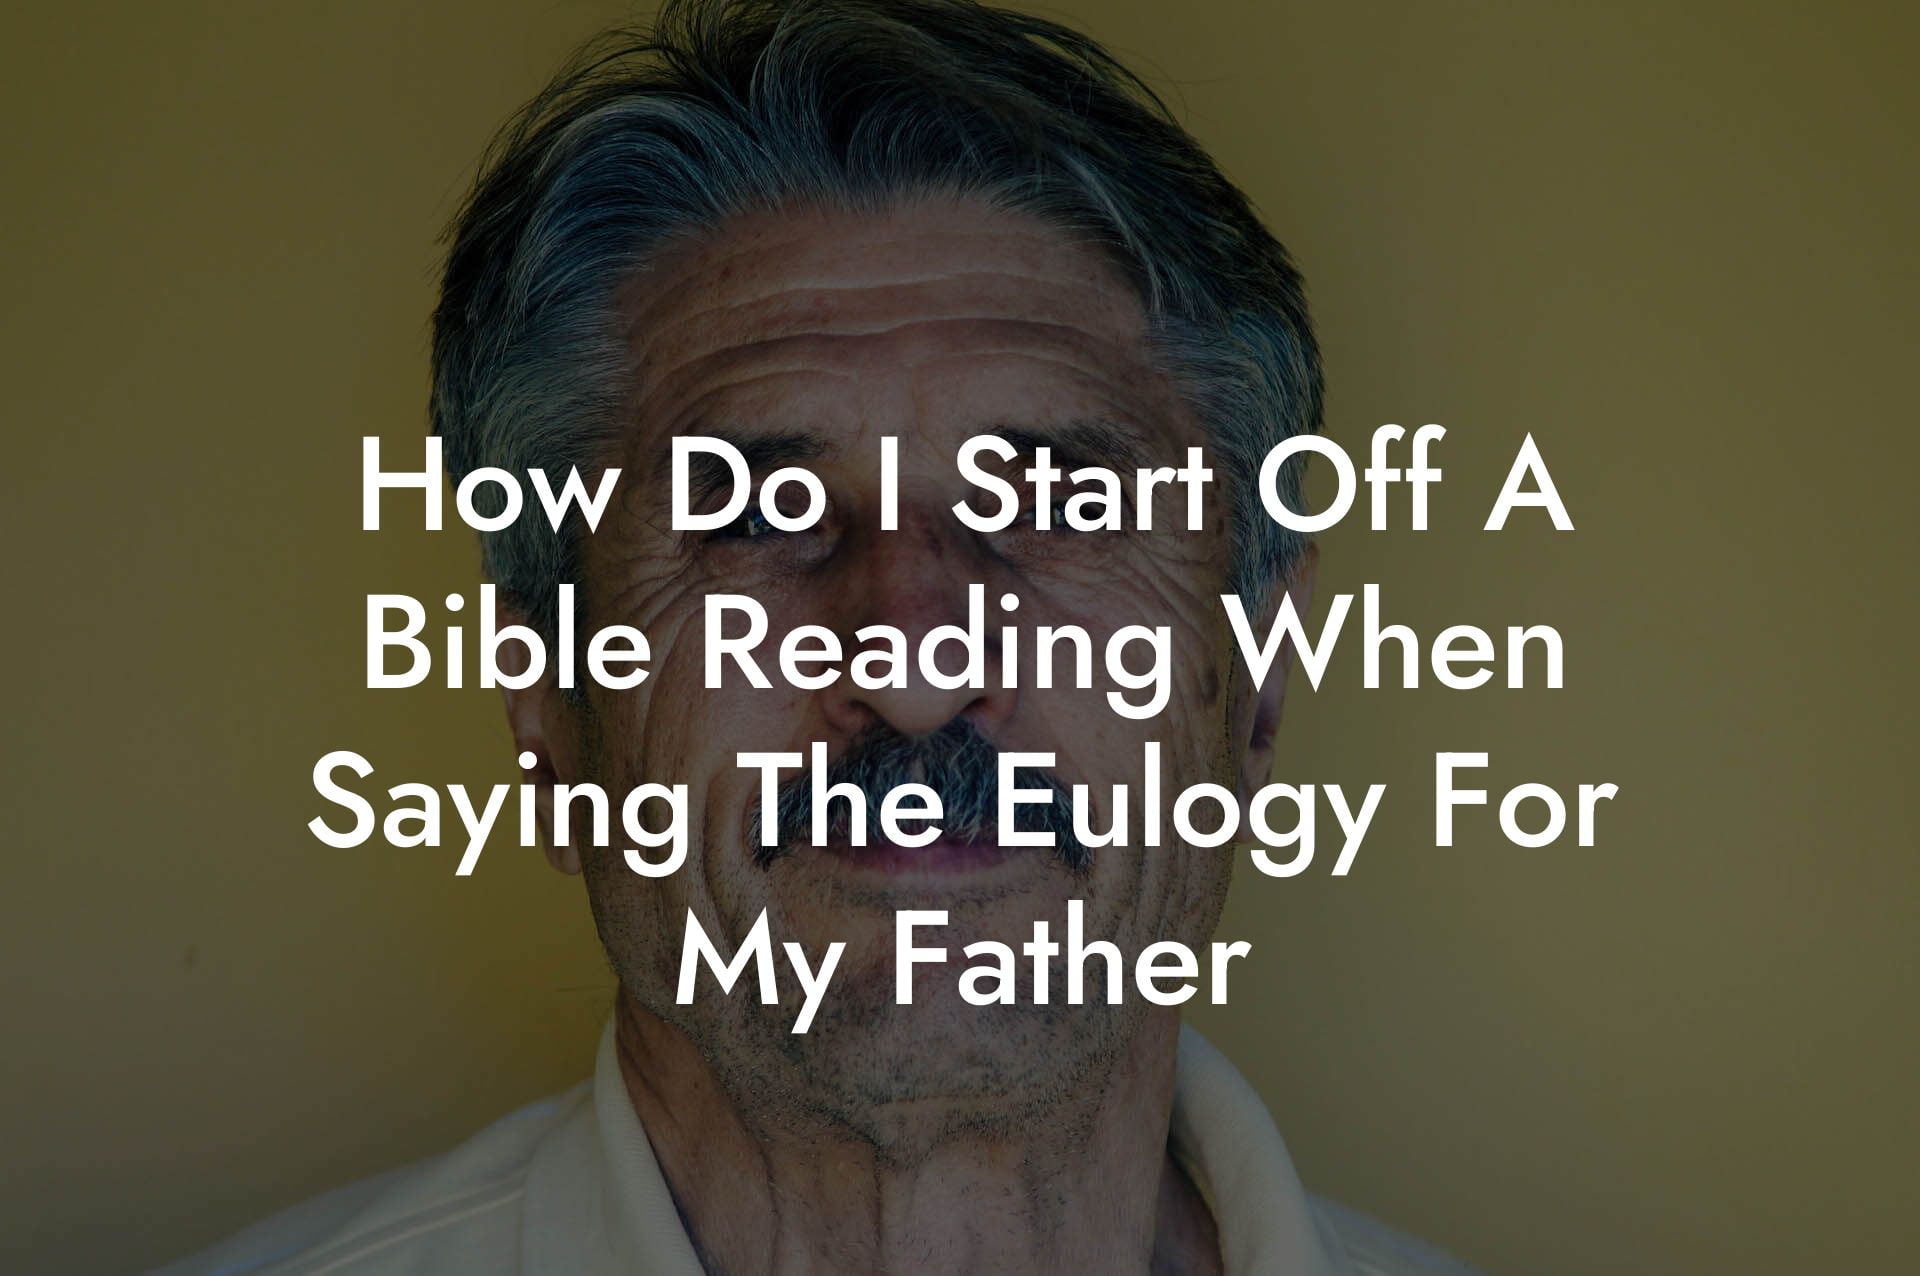 How Do I Start Off A Bible Reading When Saying The Eulogy For My Father